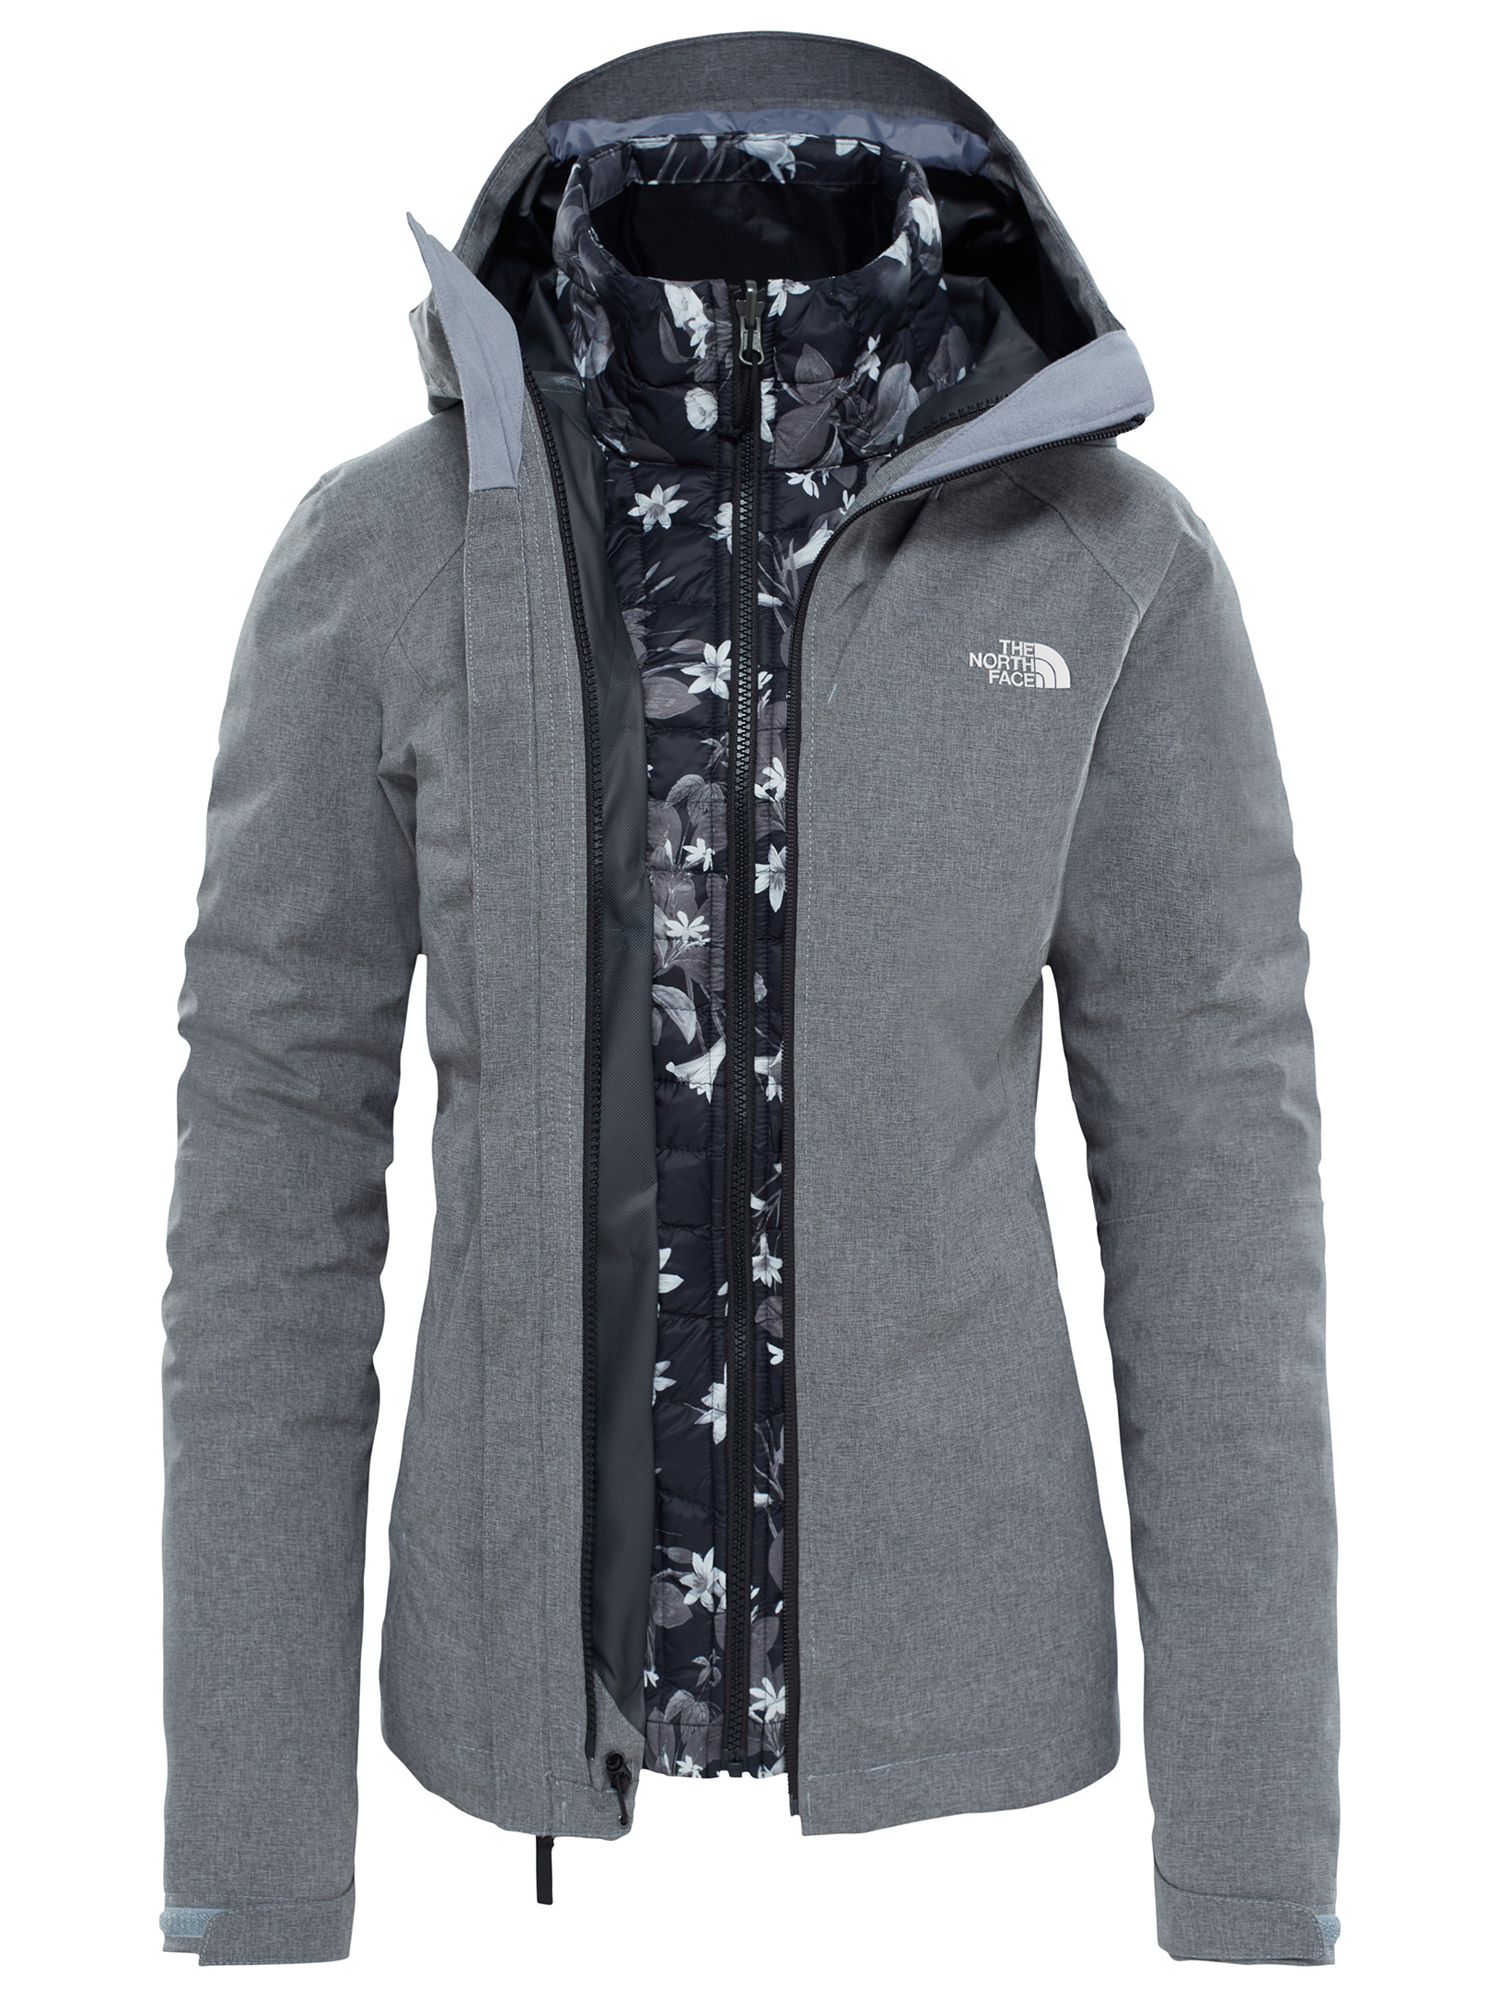 women's thermoball triclimate jacket